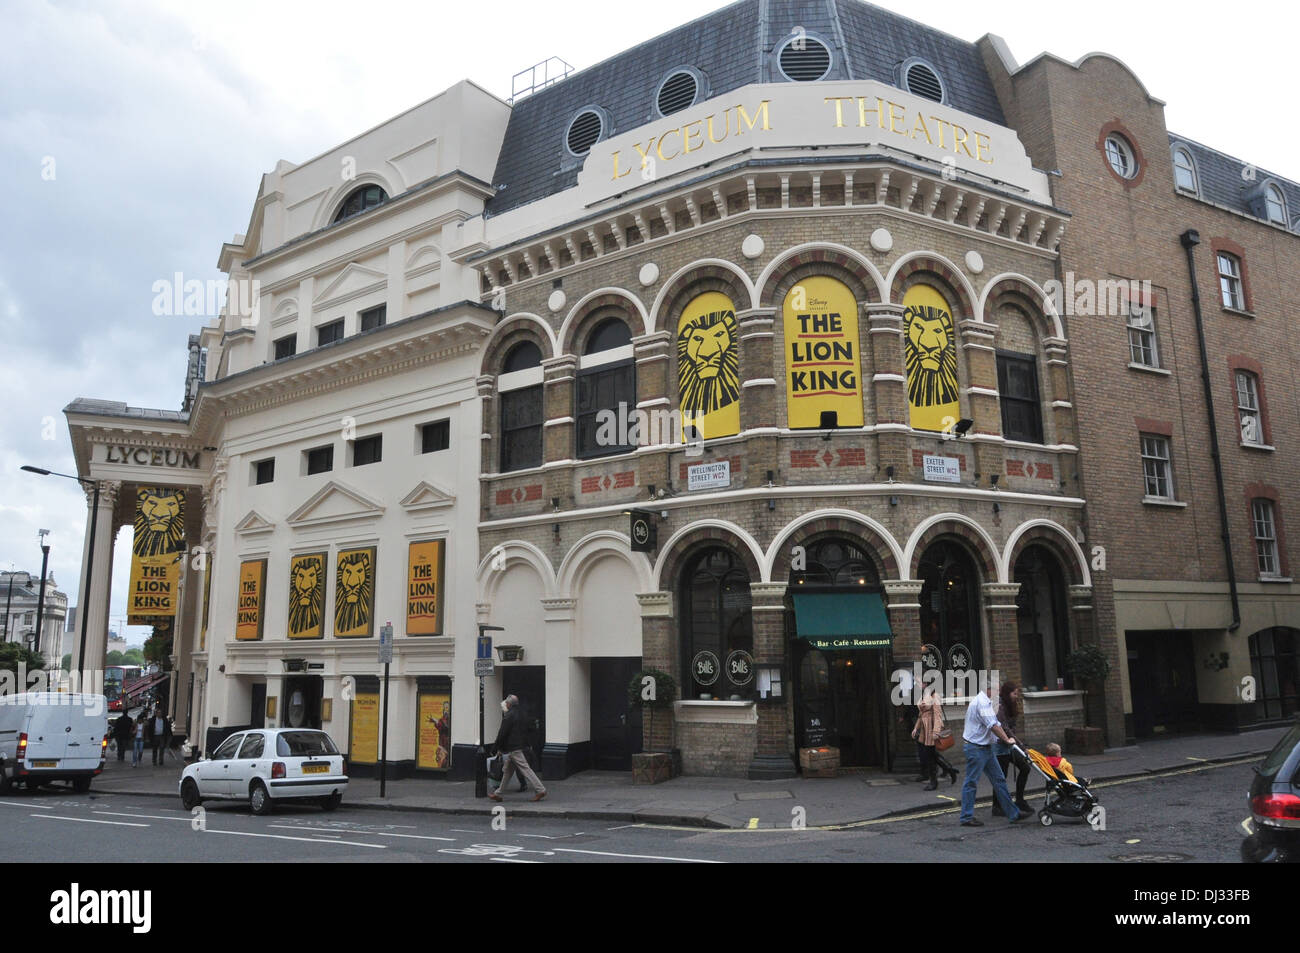 LYCEUM THEATRE LONDON THE LION KING Stock Photo